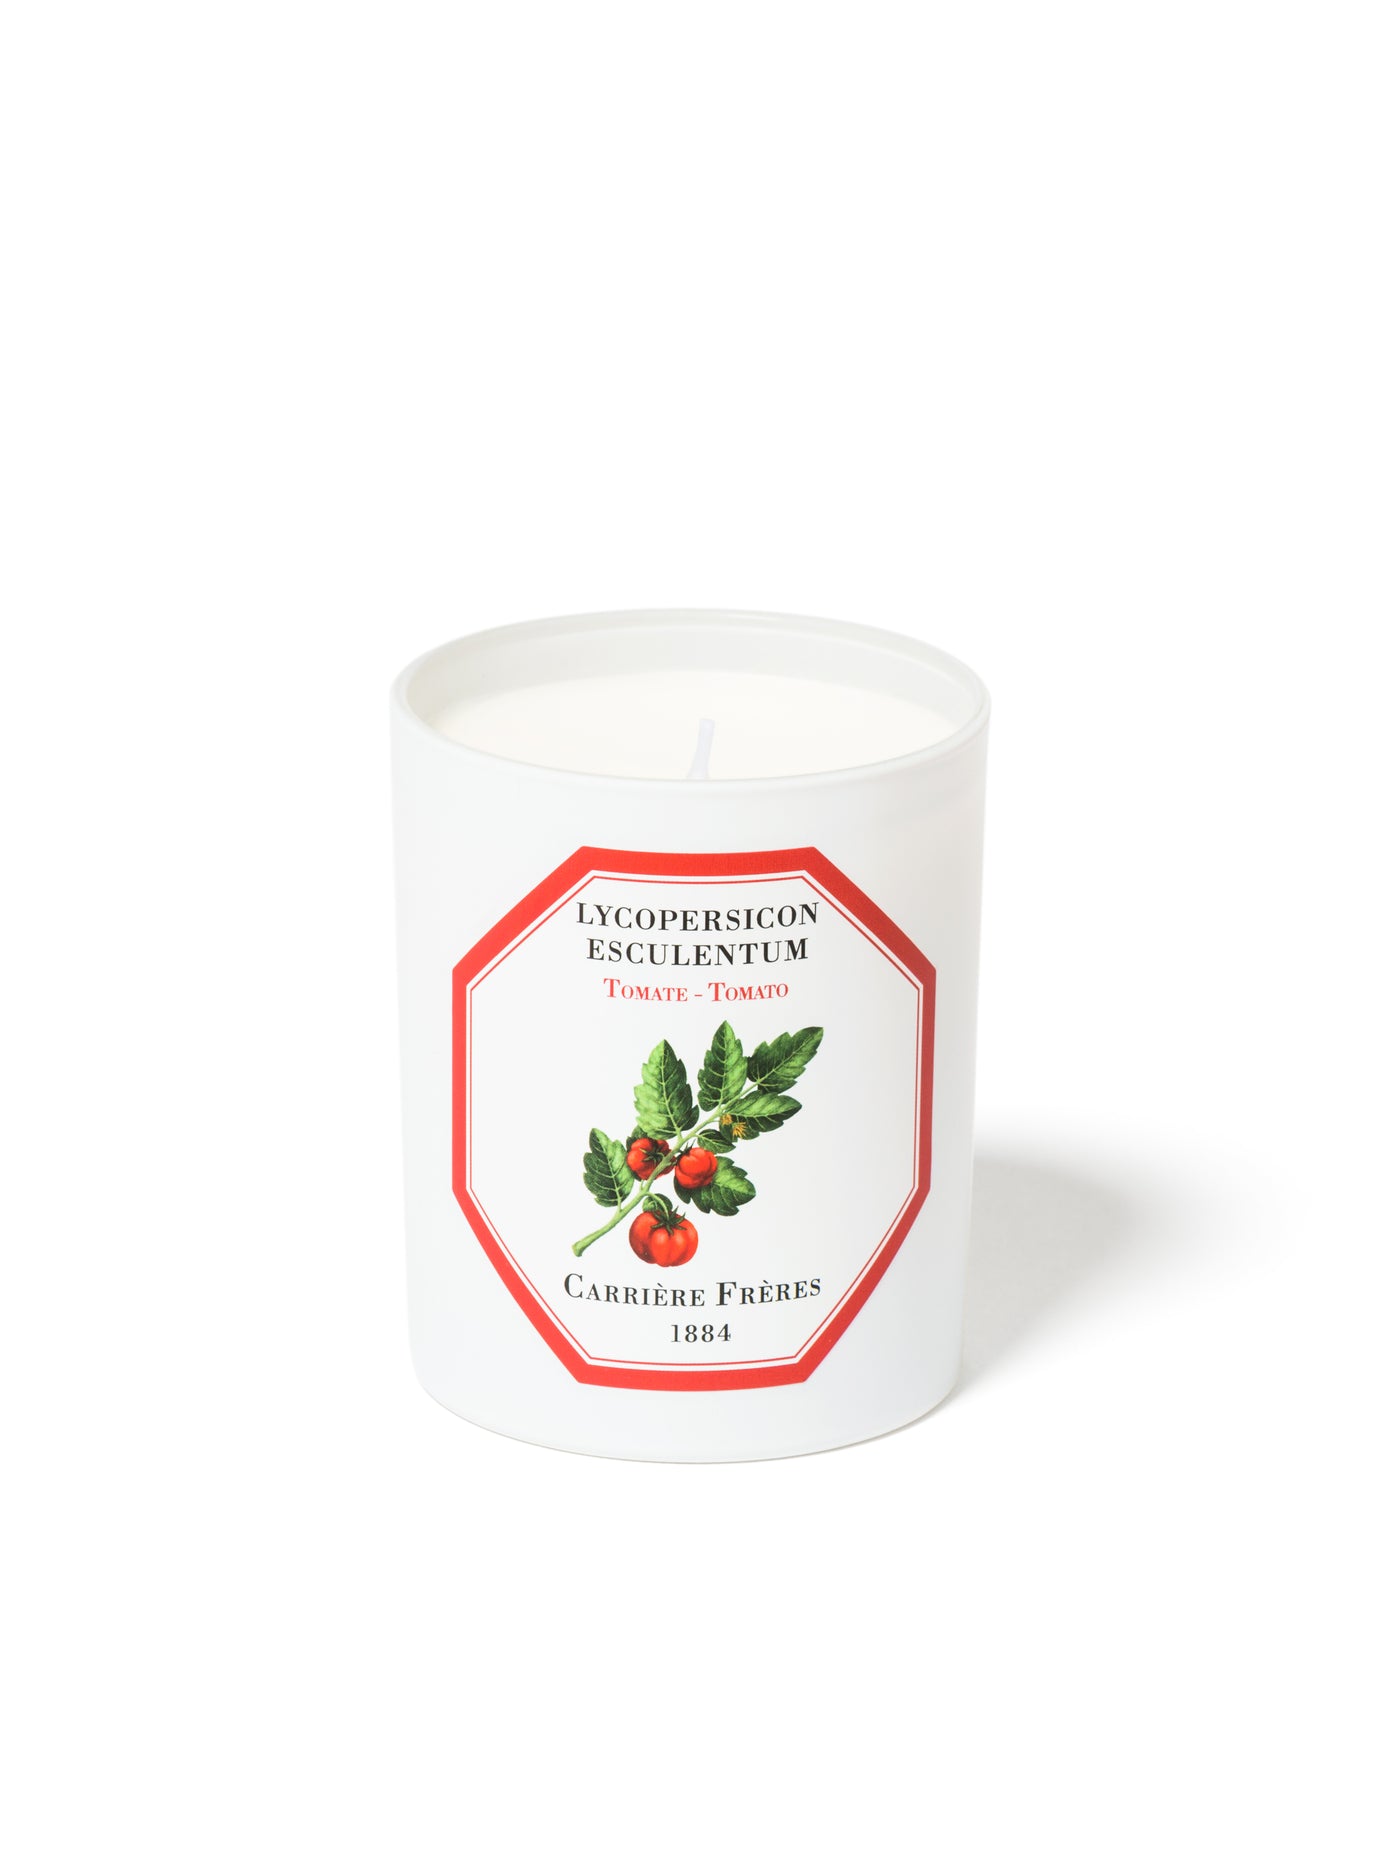 Carriere Freres Scented Tomato Candle